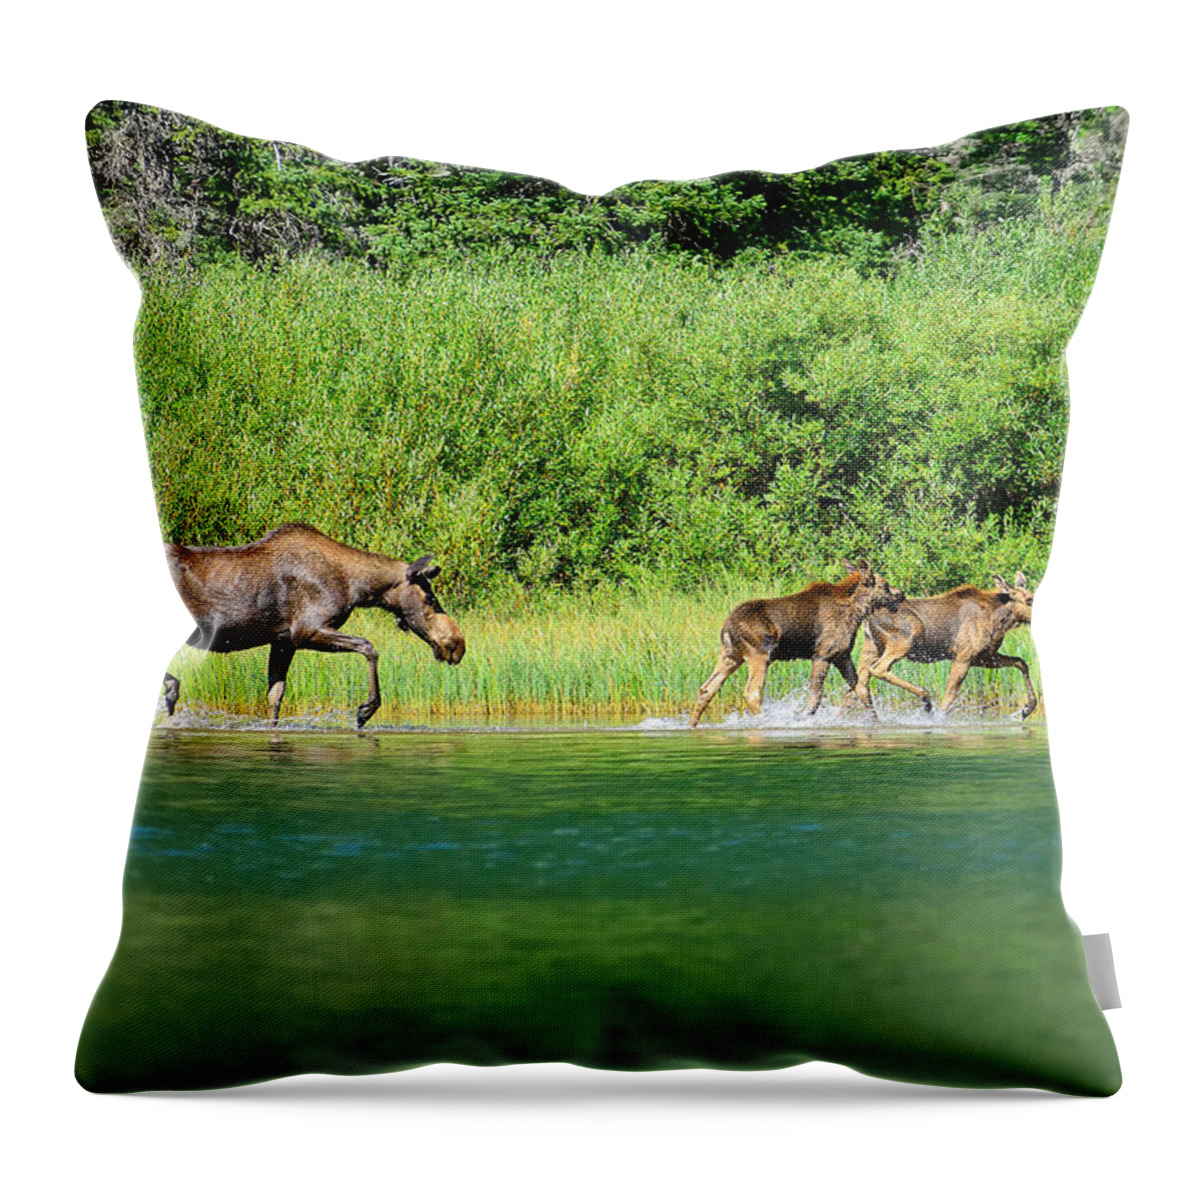 Moose Throw Pillow featuring the photograph Moose Play by Greg Norrell